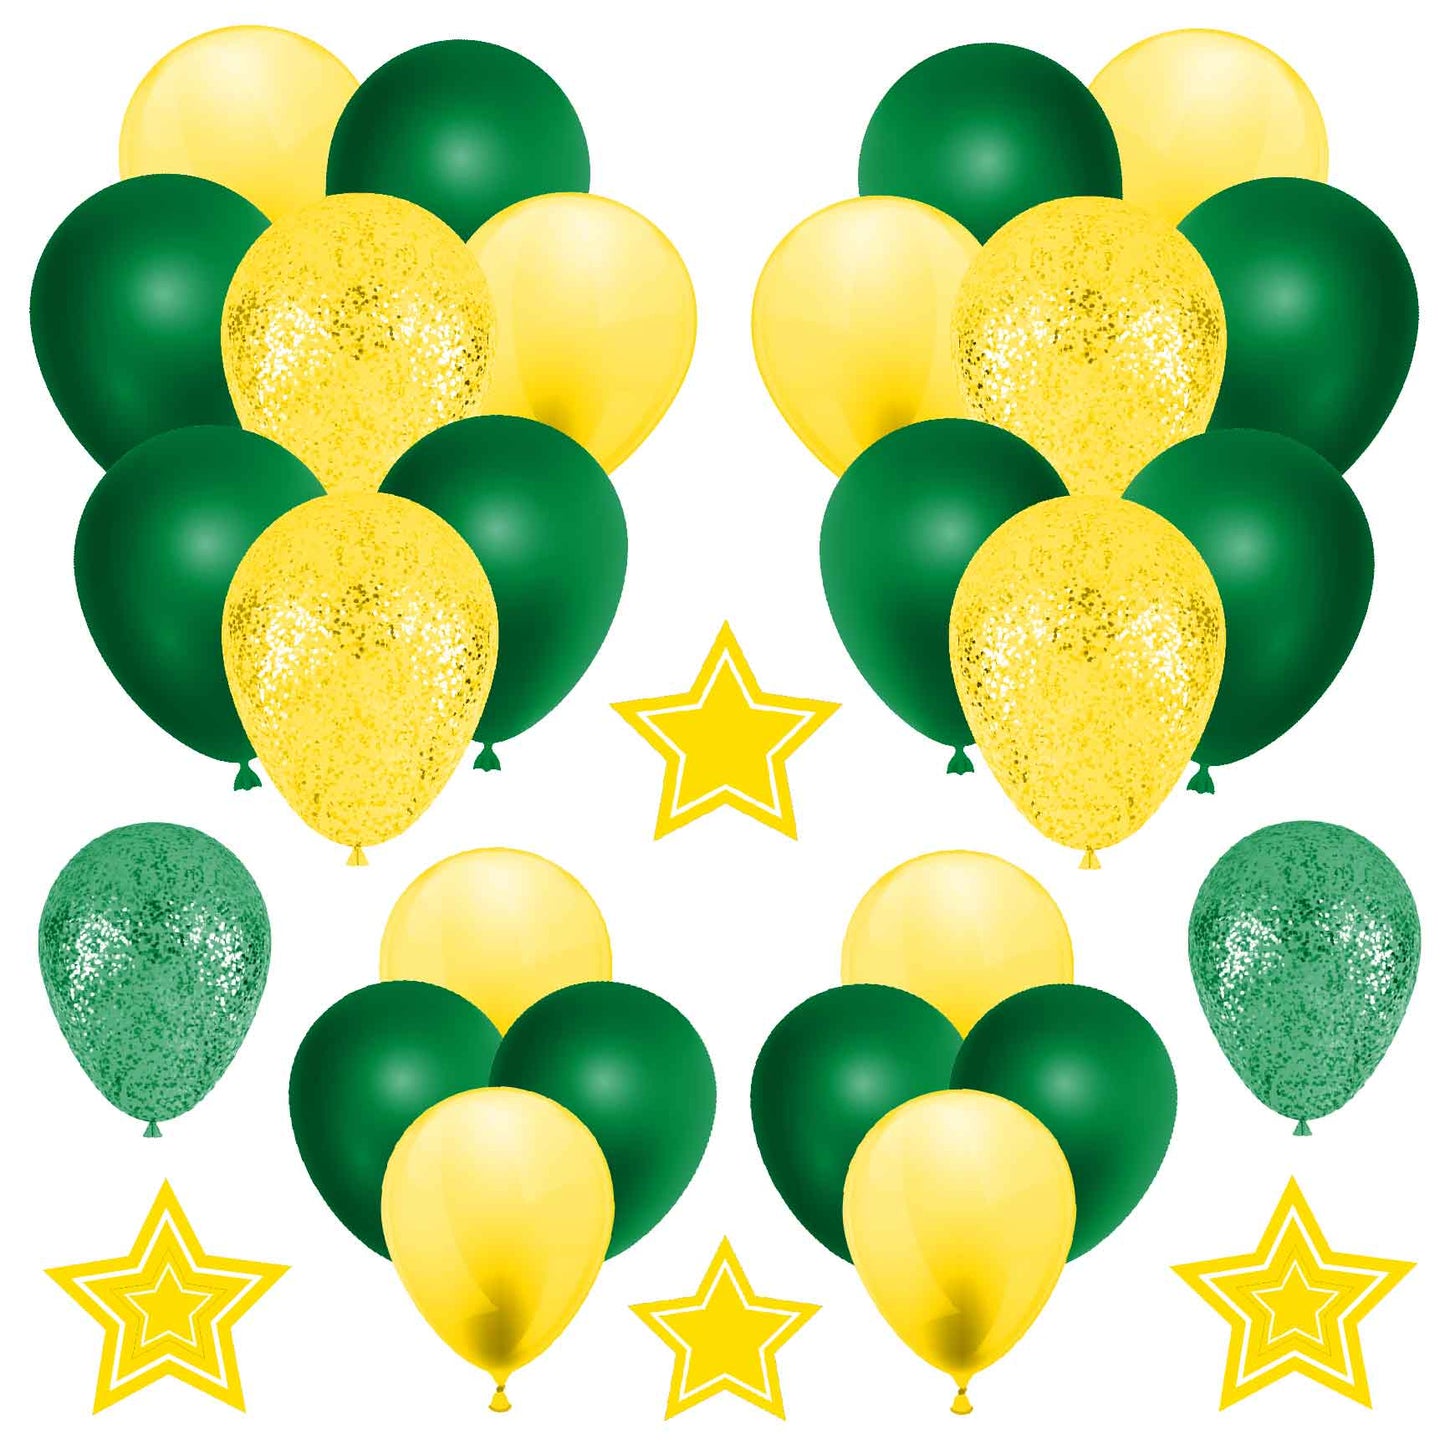 Yellow and Green Balloons Half Sheet Misc. (Must Purchase 2 Half sheets - You Can Mix & Match)